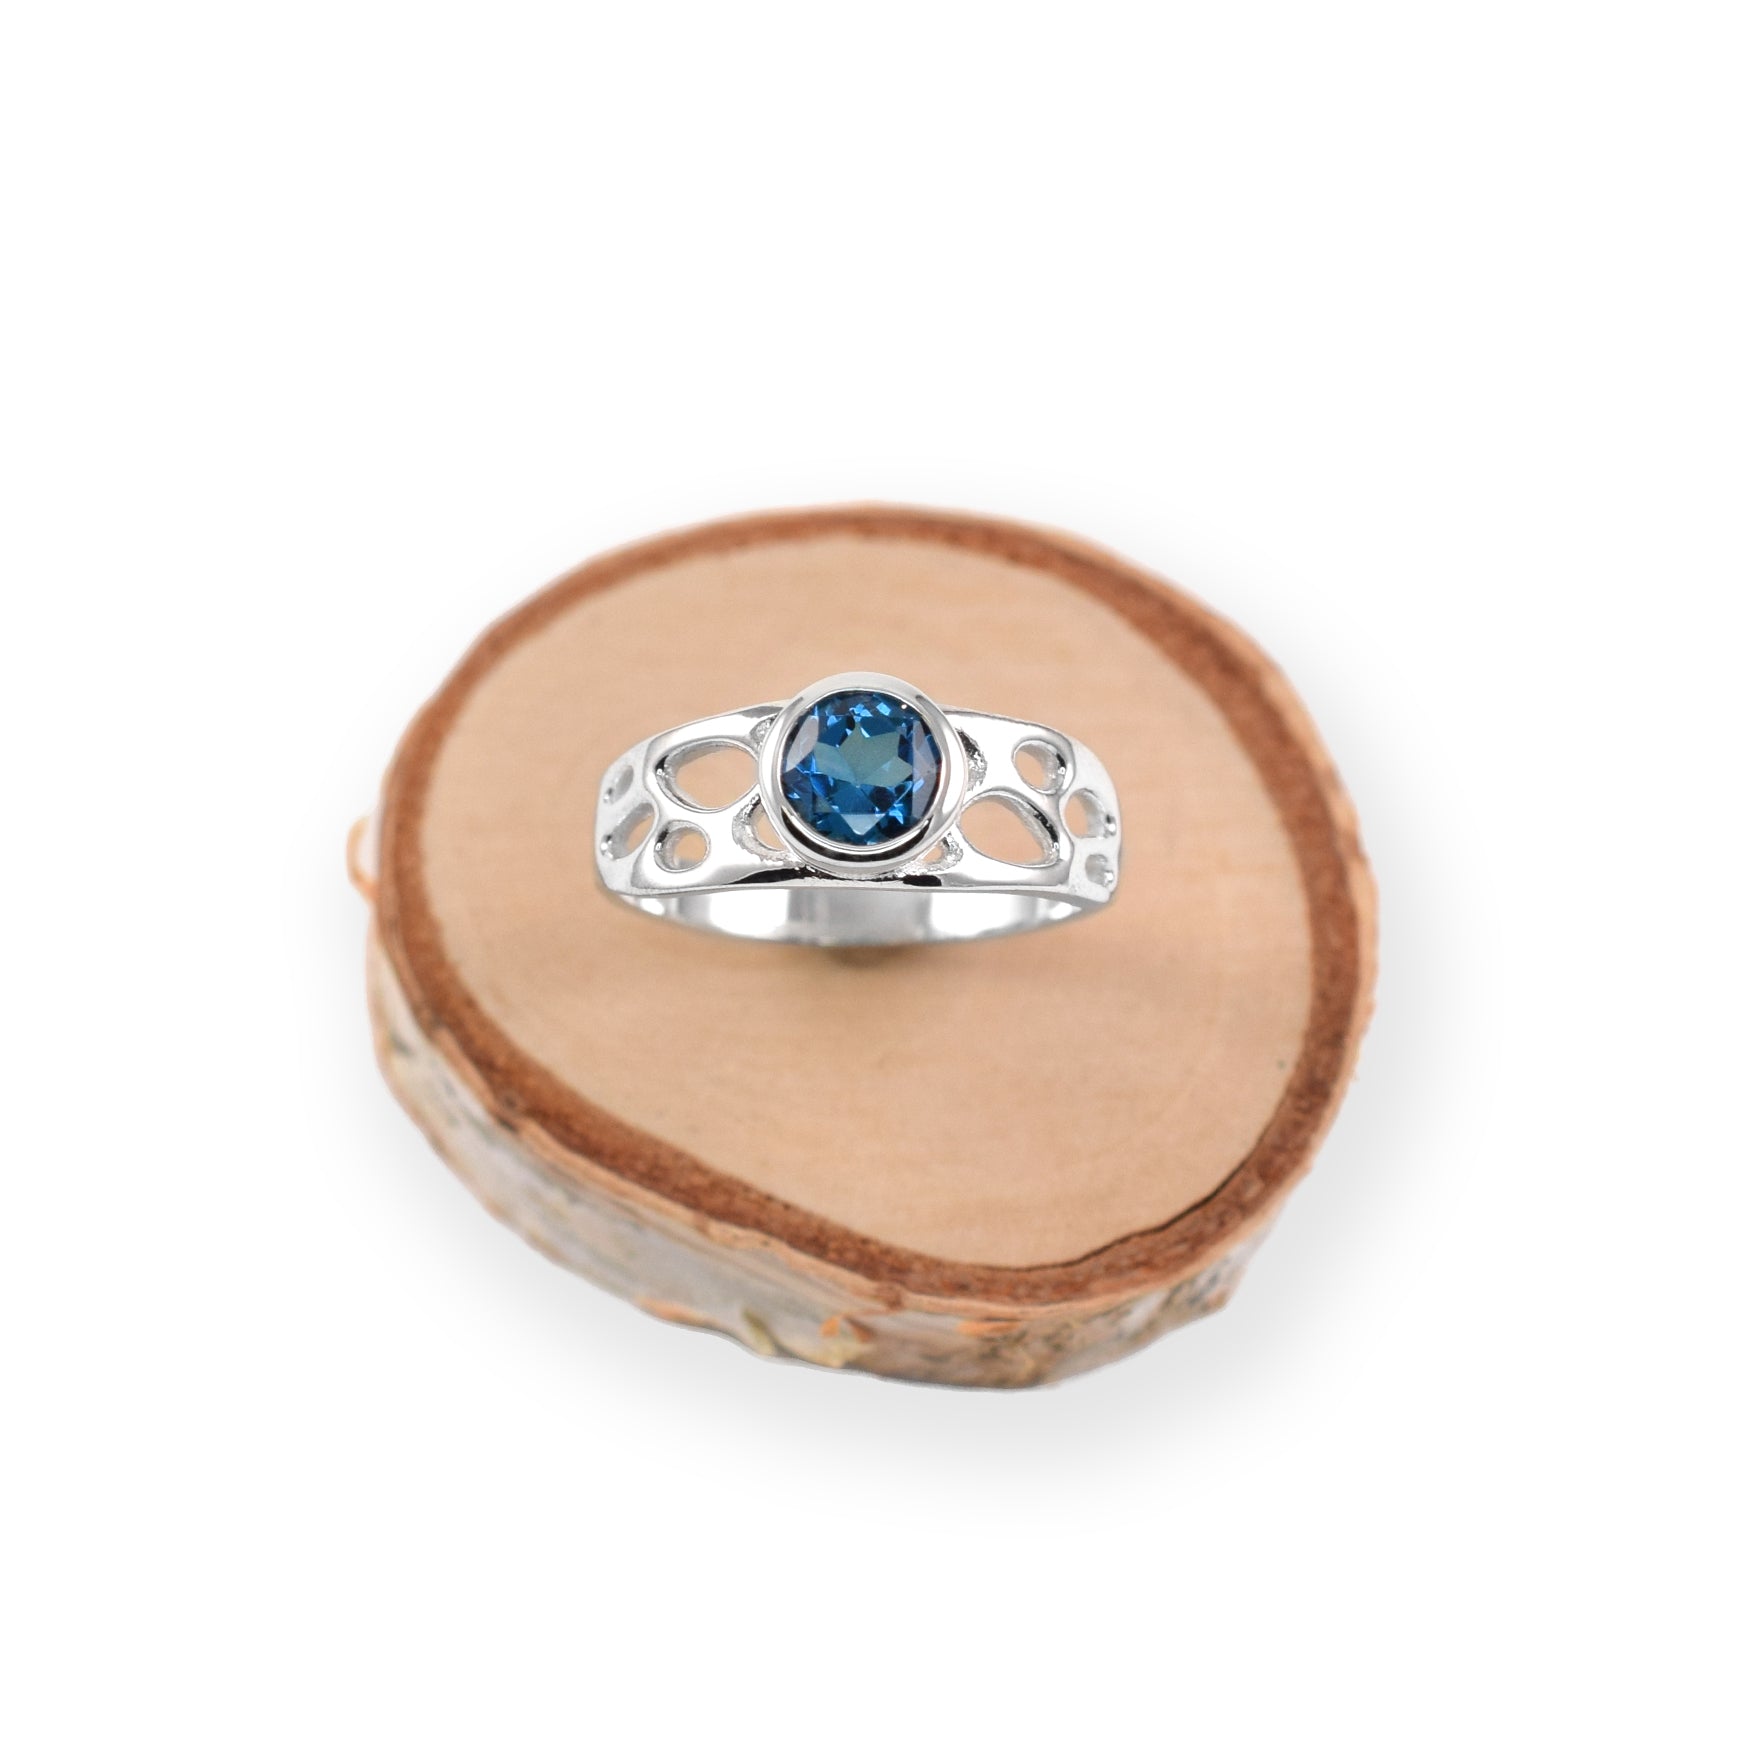 botanical solitaire ring with blue gemstone on wood slice